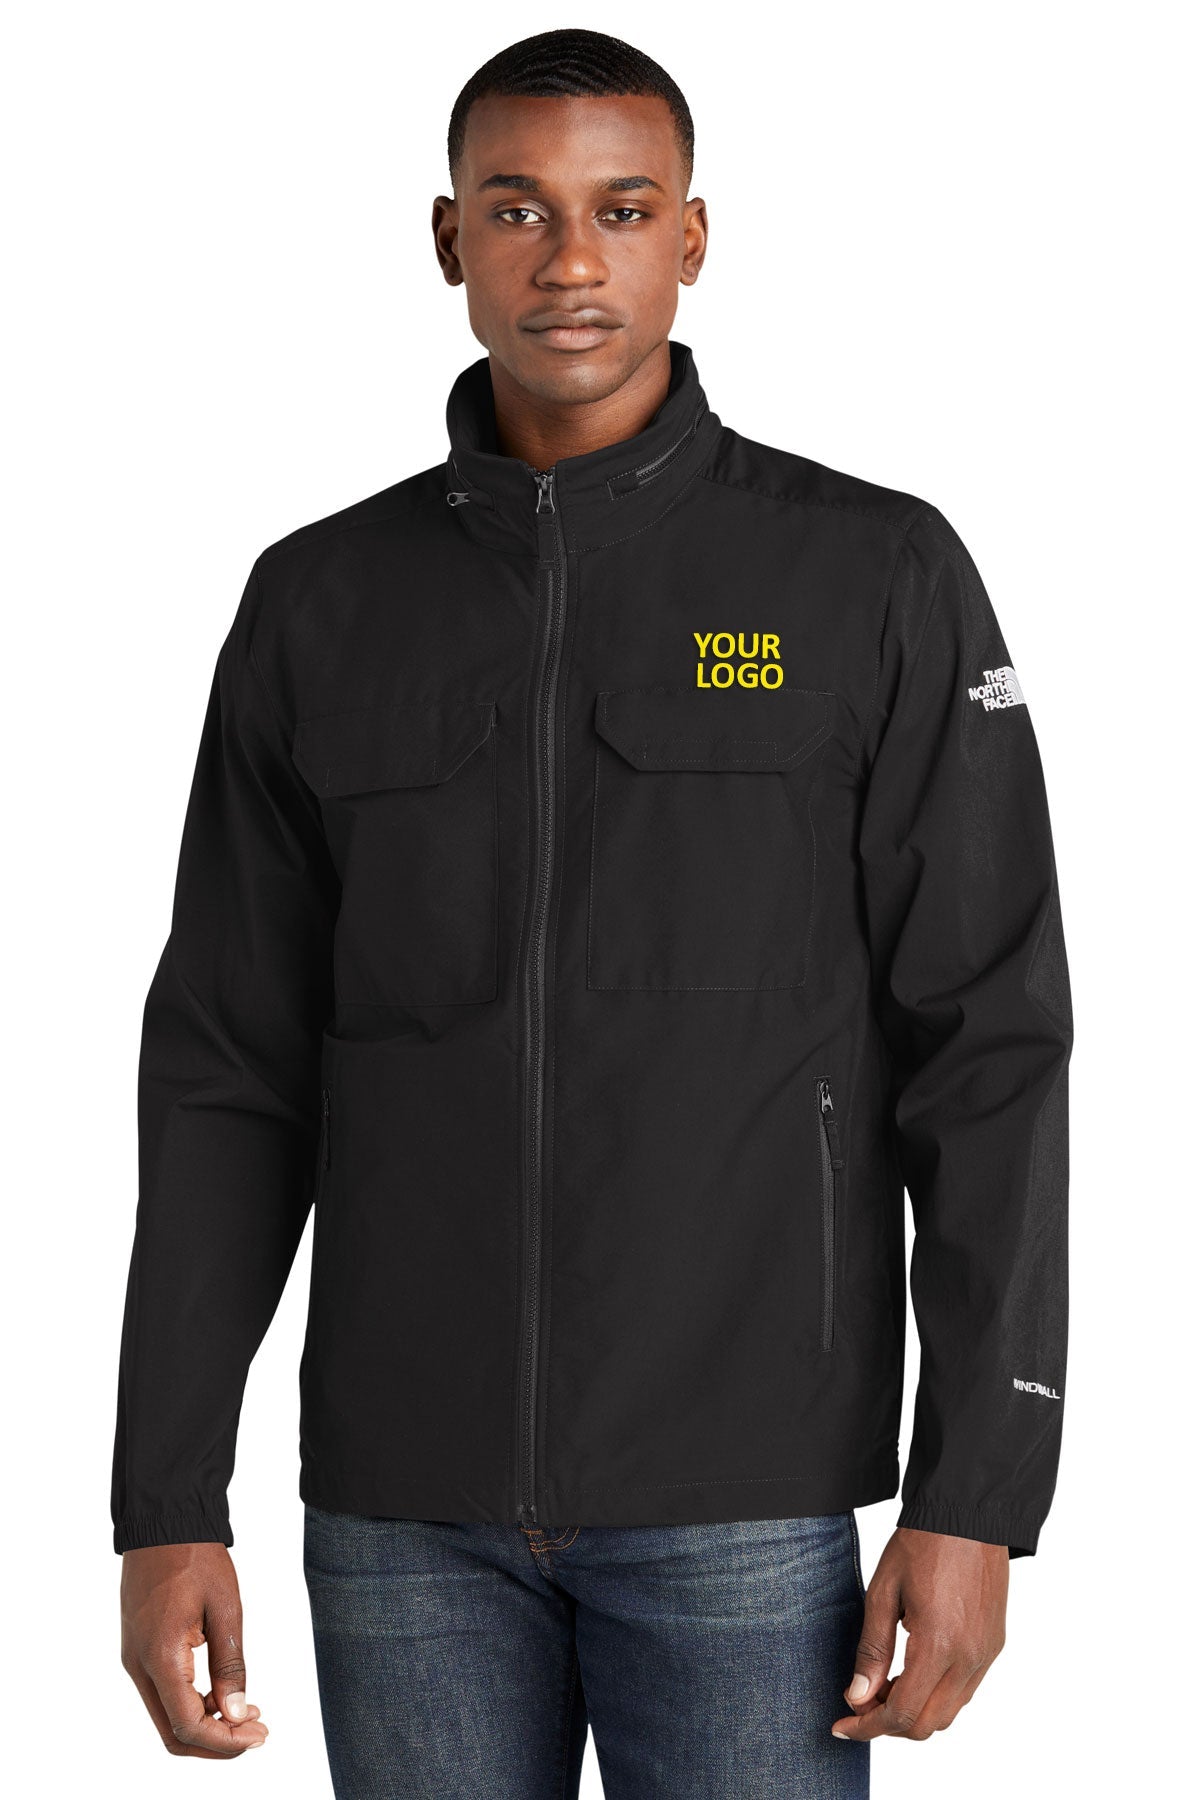 The North Face TNF Black NF0A5ISG jackets with company logo